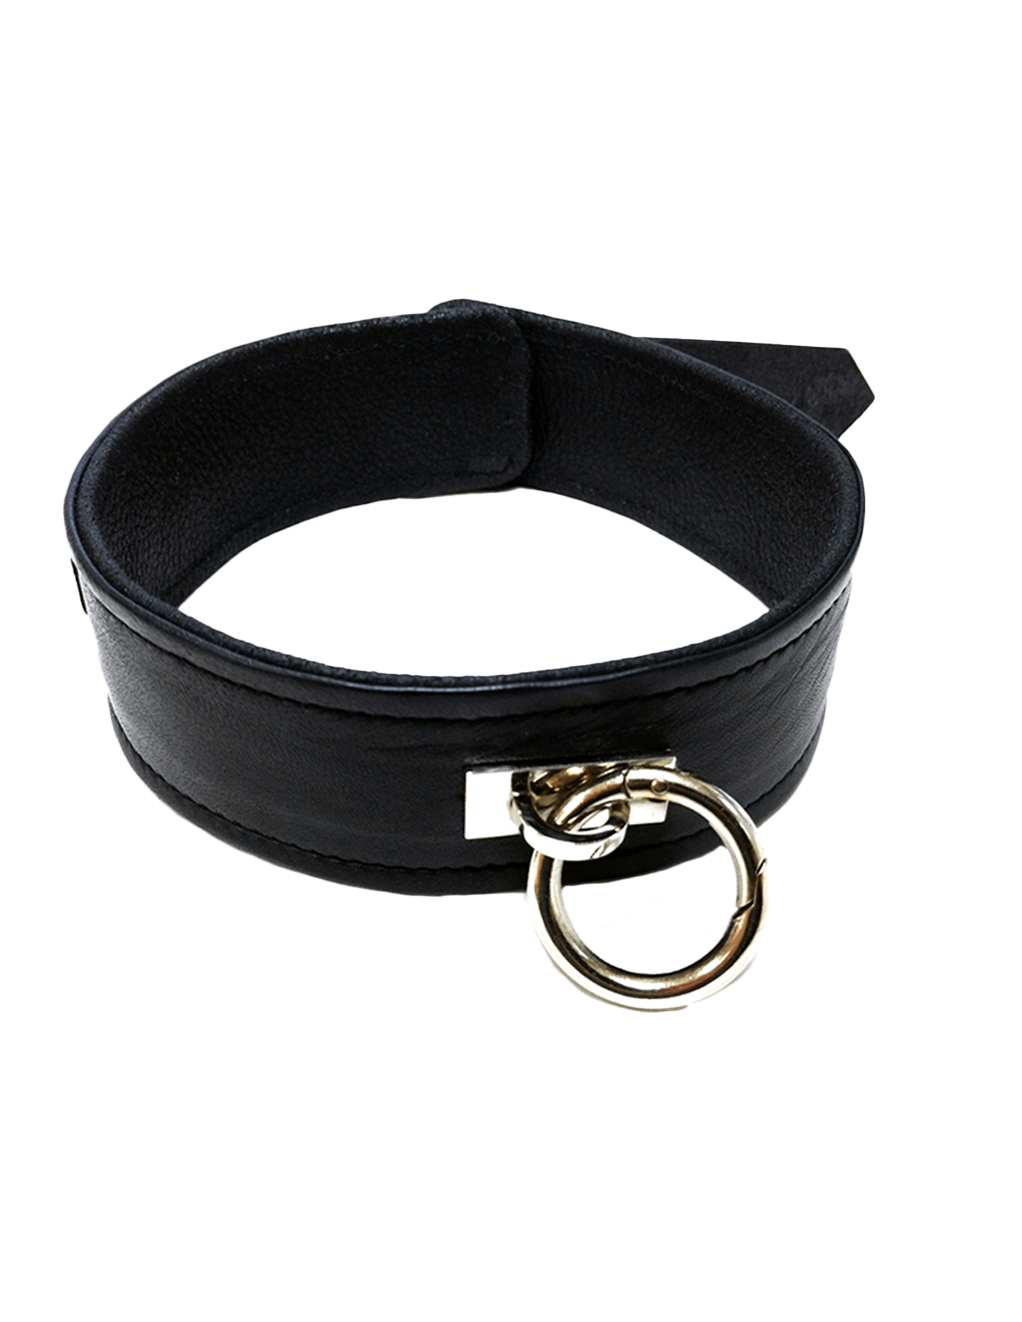 Rouge Leather Collar - Black - Main